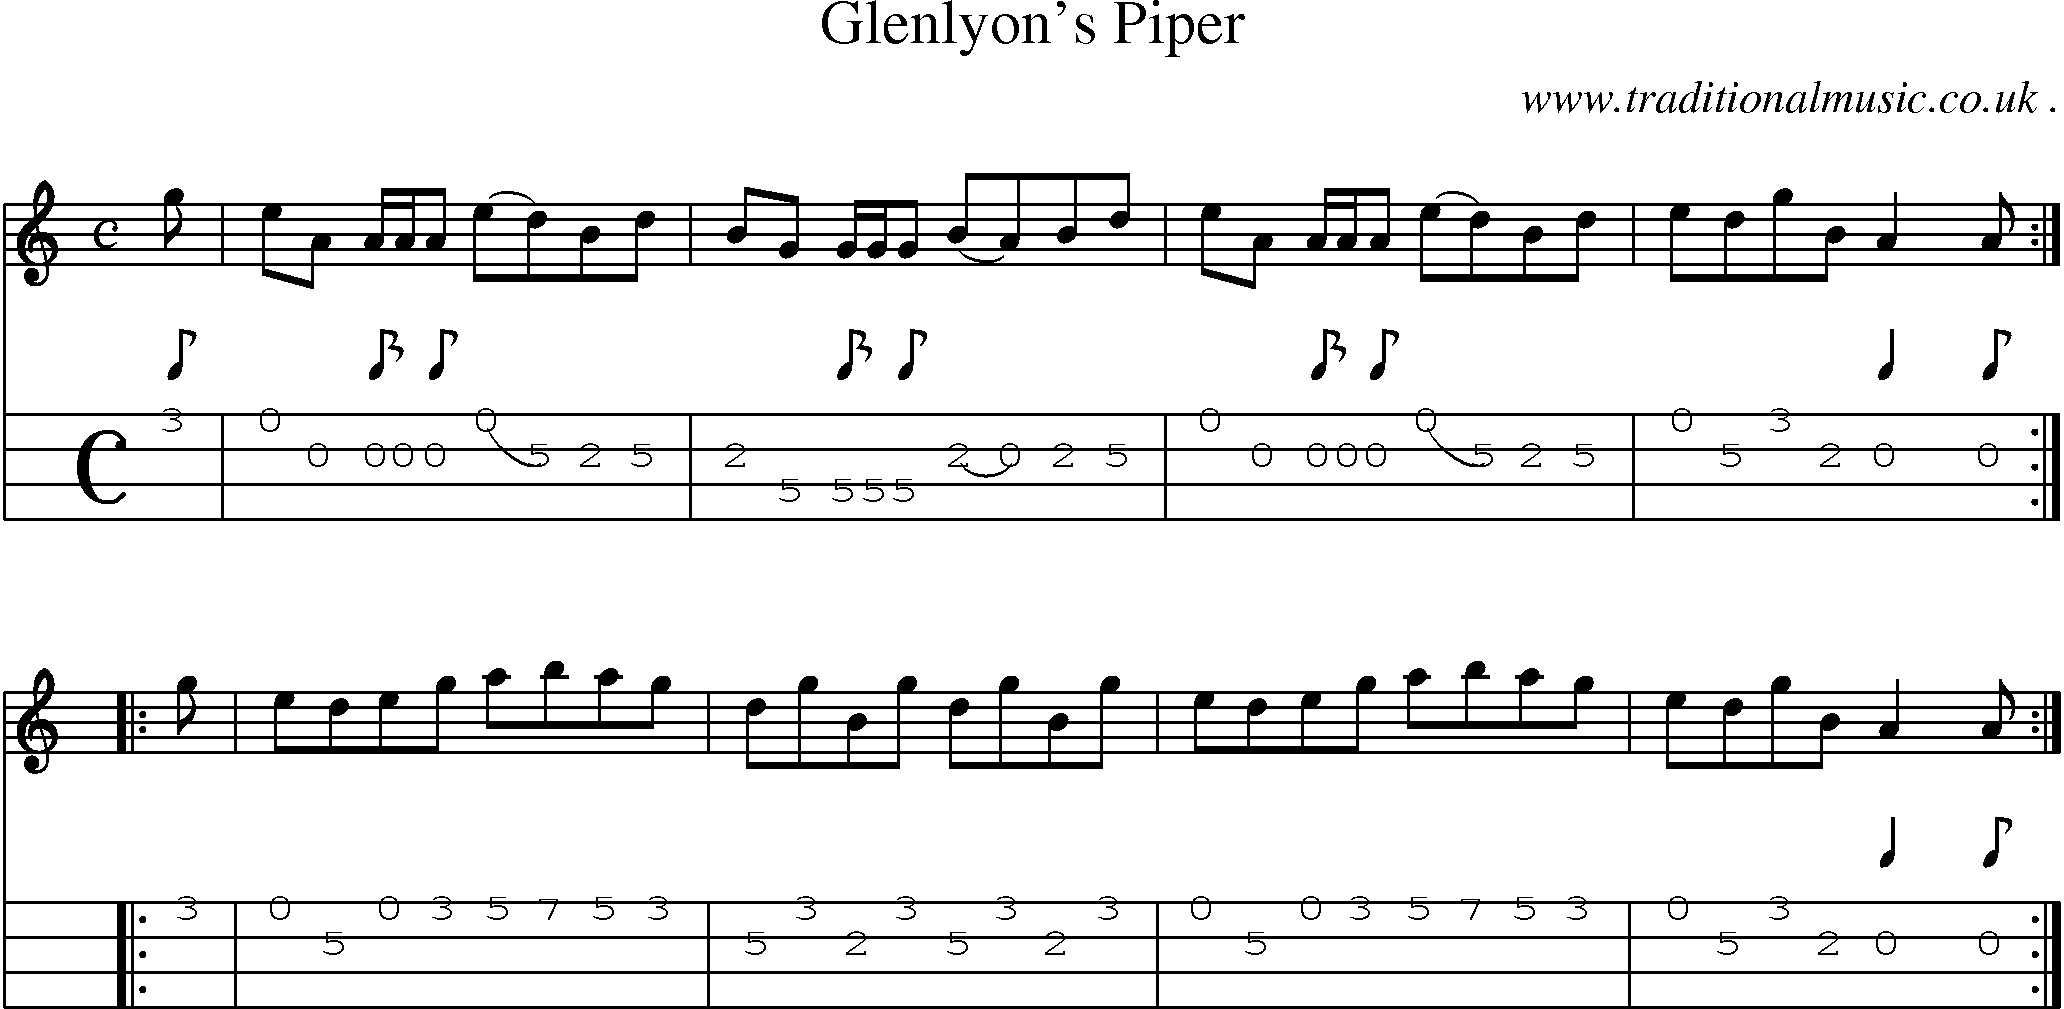 Sheet-music  score, Chords and Mandolin Tabs for Glenlyons Piper